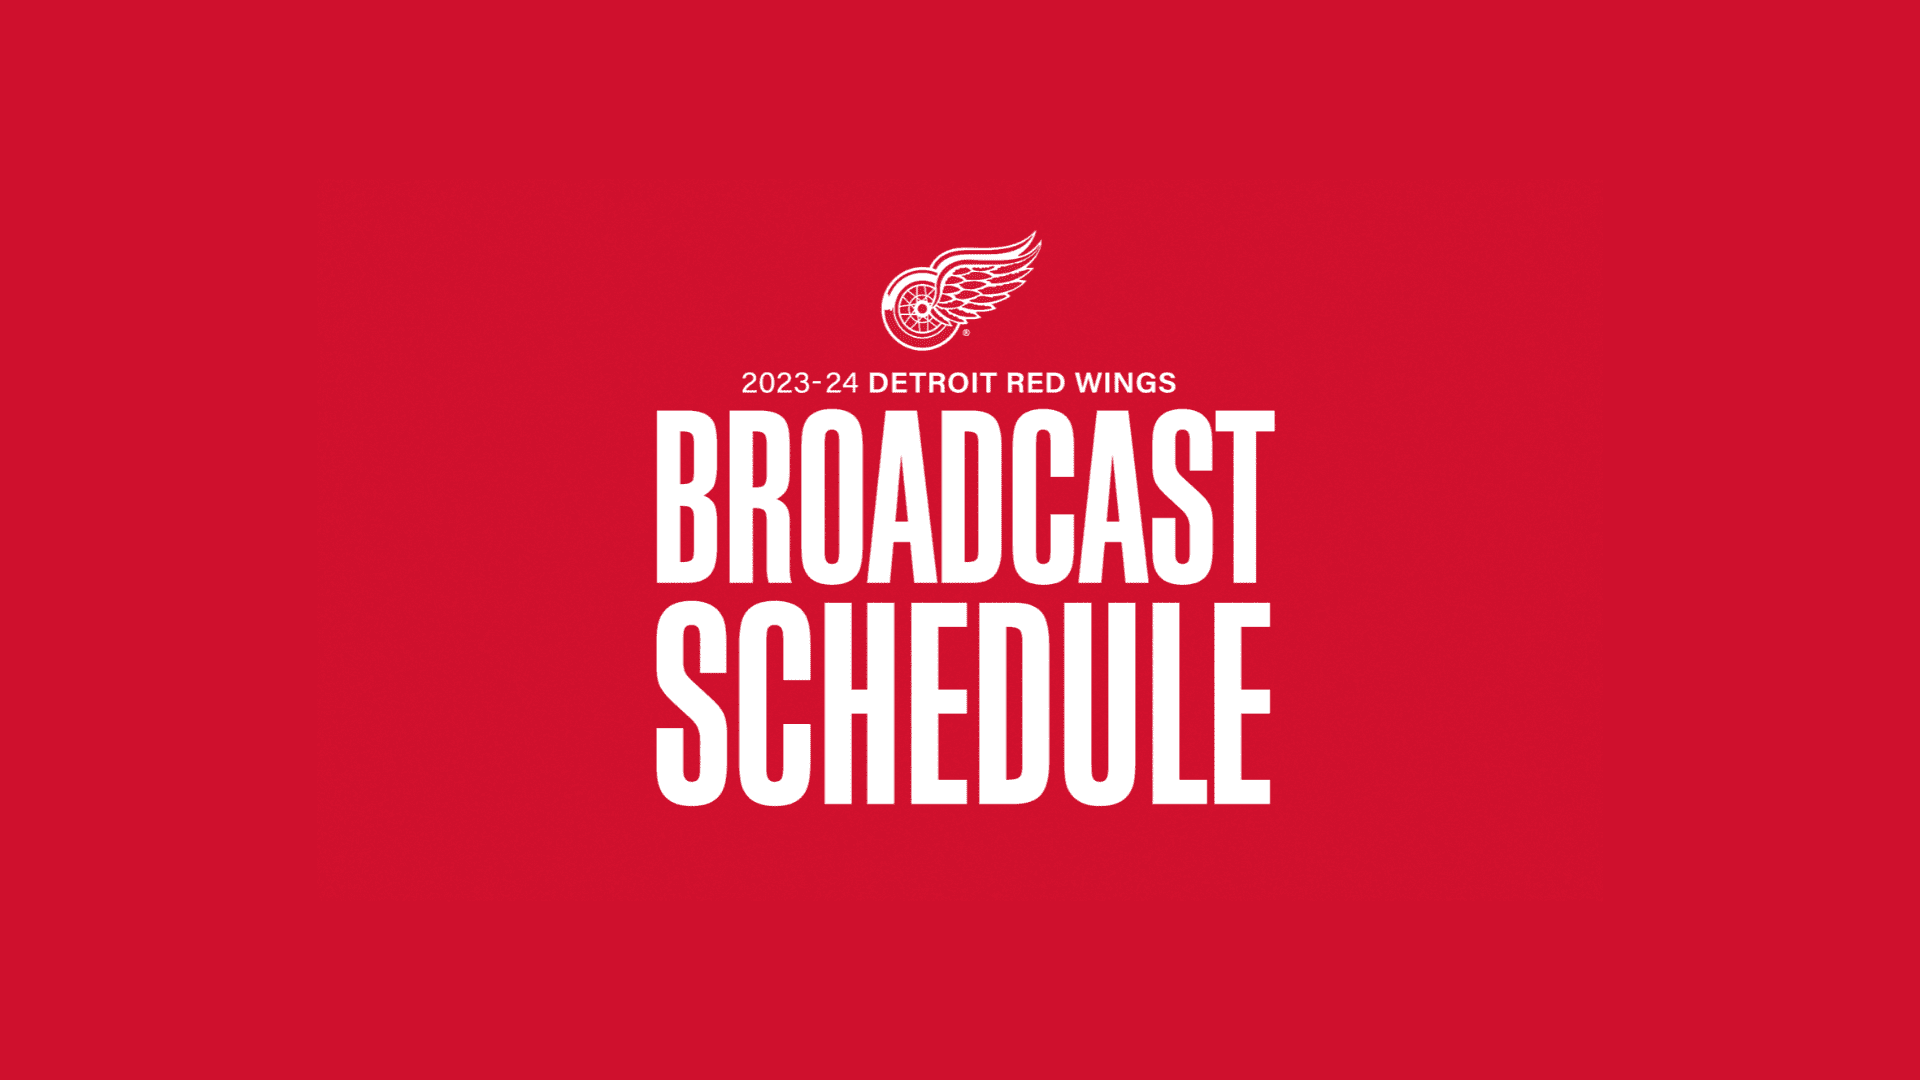 Single-game tickets for 2023-24 Detroit Red Wings season go on sale this  Friday at 10 a.m. - Ilitch Companies News Hub